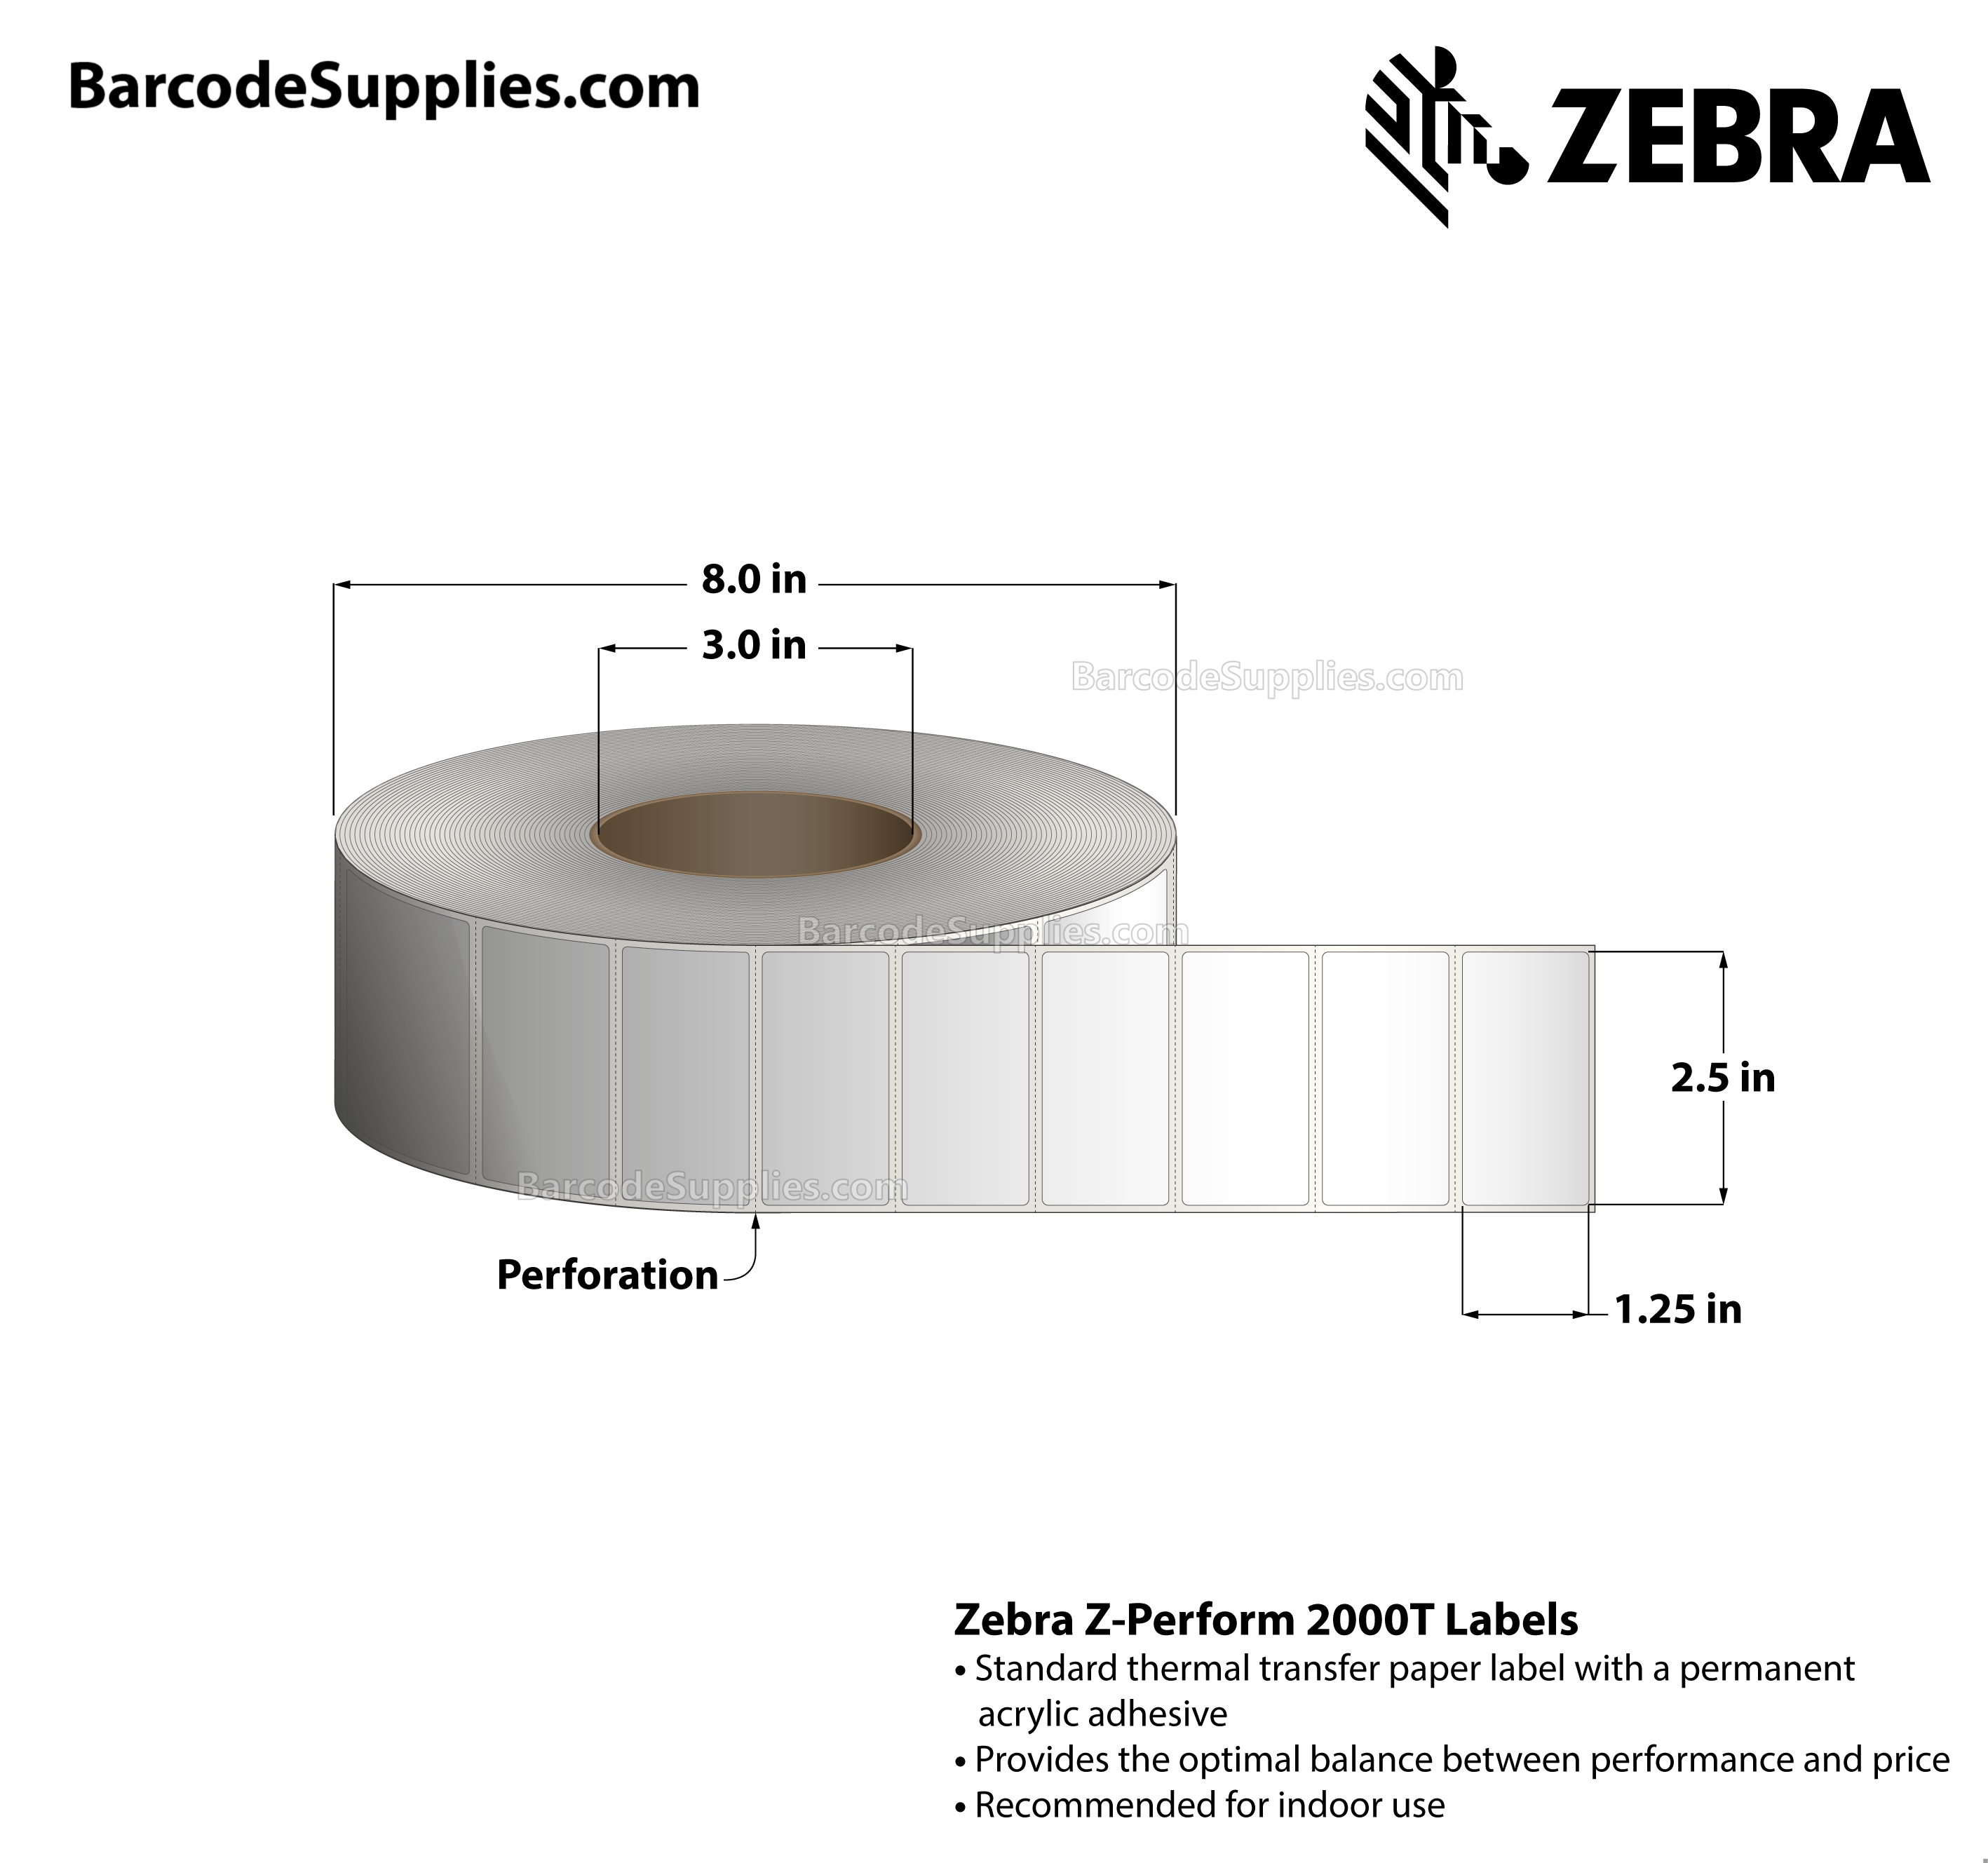 2.5 x 1.25 Thermal Transfer White Z-Perform 2000T Labels With Permanent Adhesive - Perforated - 2000 Labels Per Roll - Carton Of 4 Rolls - 8000 Labels Total - MPN: 10022943